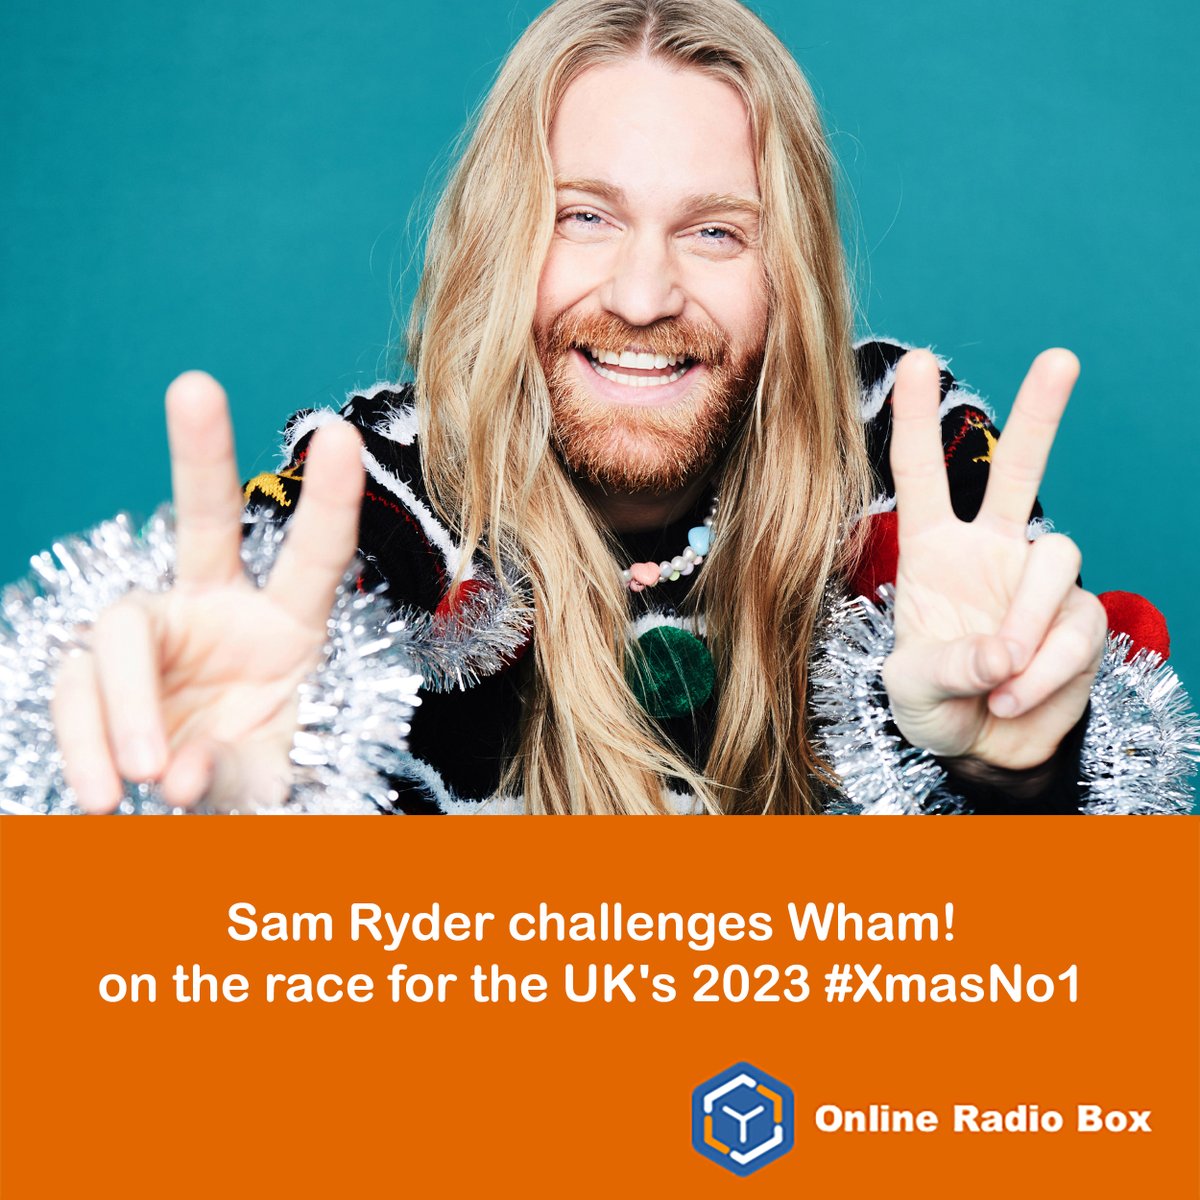 #SamRyder challenges Wham! on the race for the UK's 2023 #XmasNo1 with #YoureChristmasToMe. It's already close, less than 800 chart units away from dethroning Last Christmas.🎄🎤
Listen to Sam Ryder at onlineradiobox.com! 🎧
onlineradiobox.com/artist/3469951…
#ChristmasChartBattle